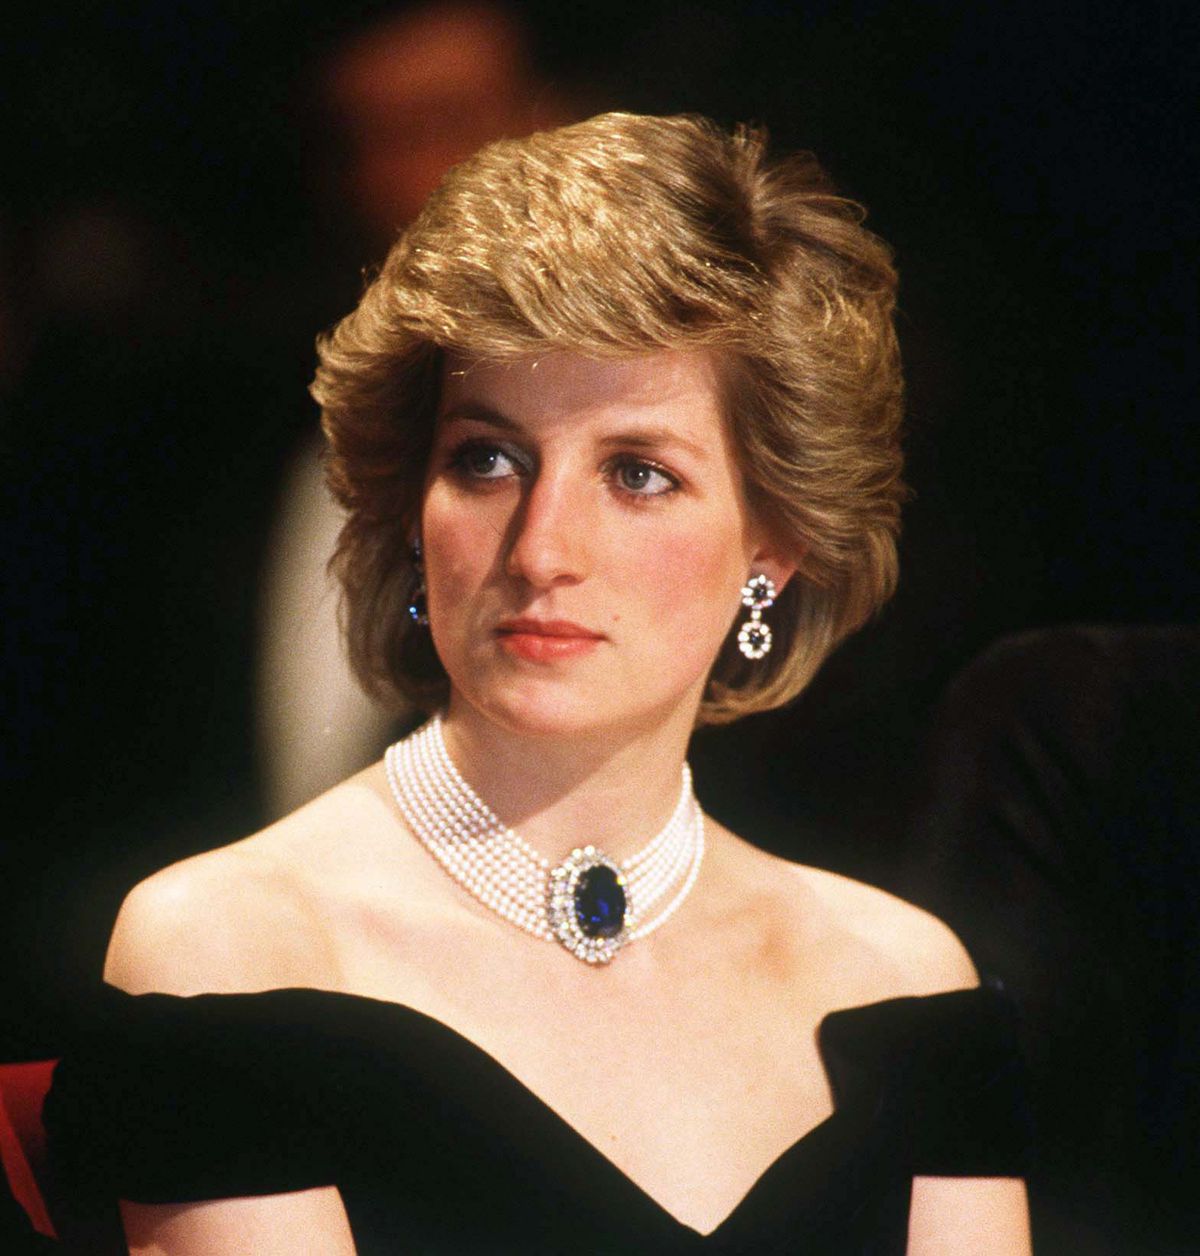 The Most Controversial Jewels in the Royal Cupboards